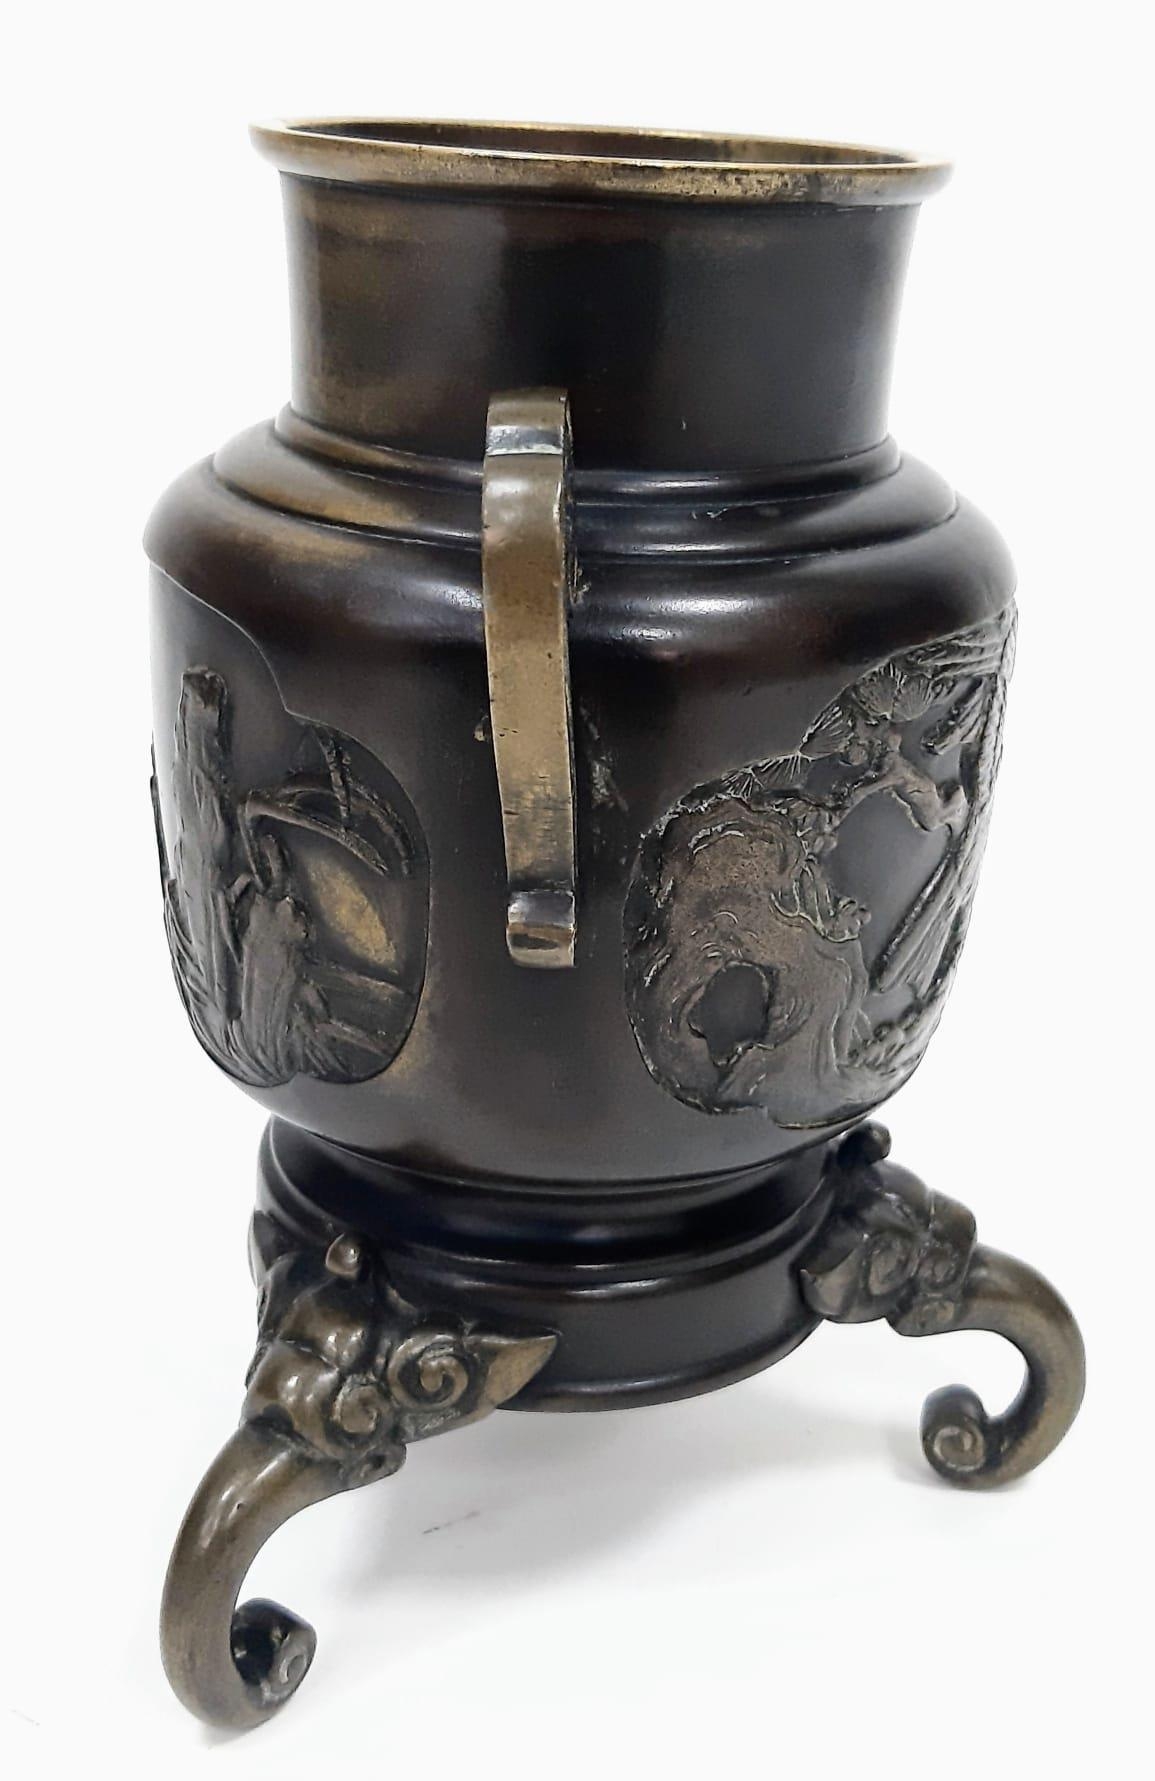 Superb Chinese Antique Bronze Censer. Depicting a Phoenix Bird in foliage. Wonderful detail, quality - Image 4 of 7